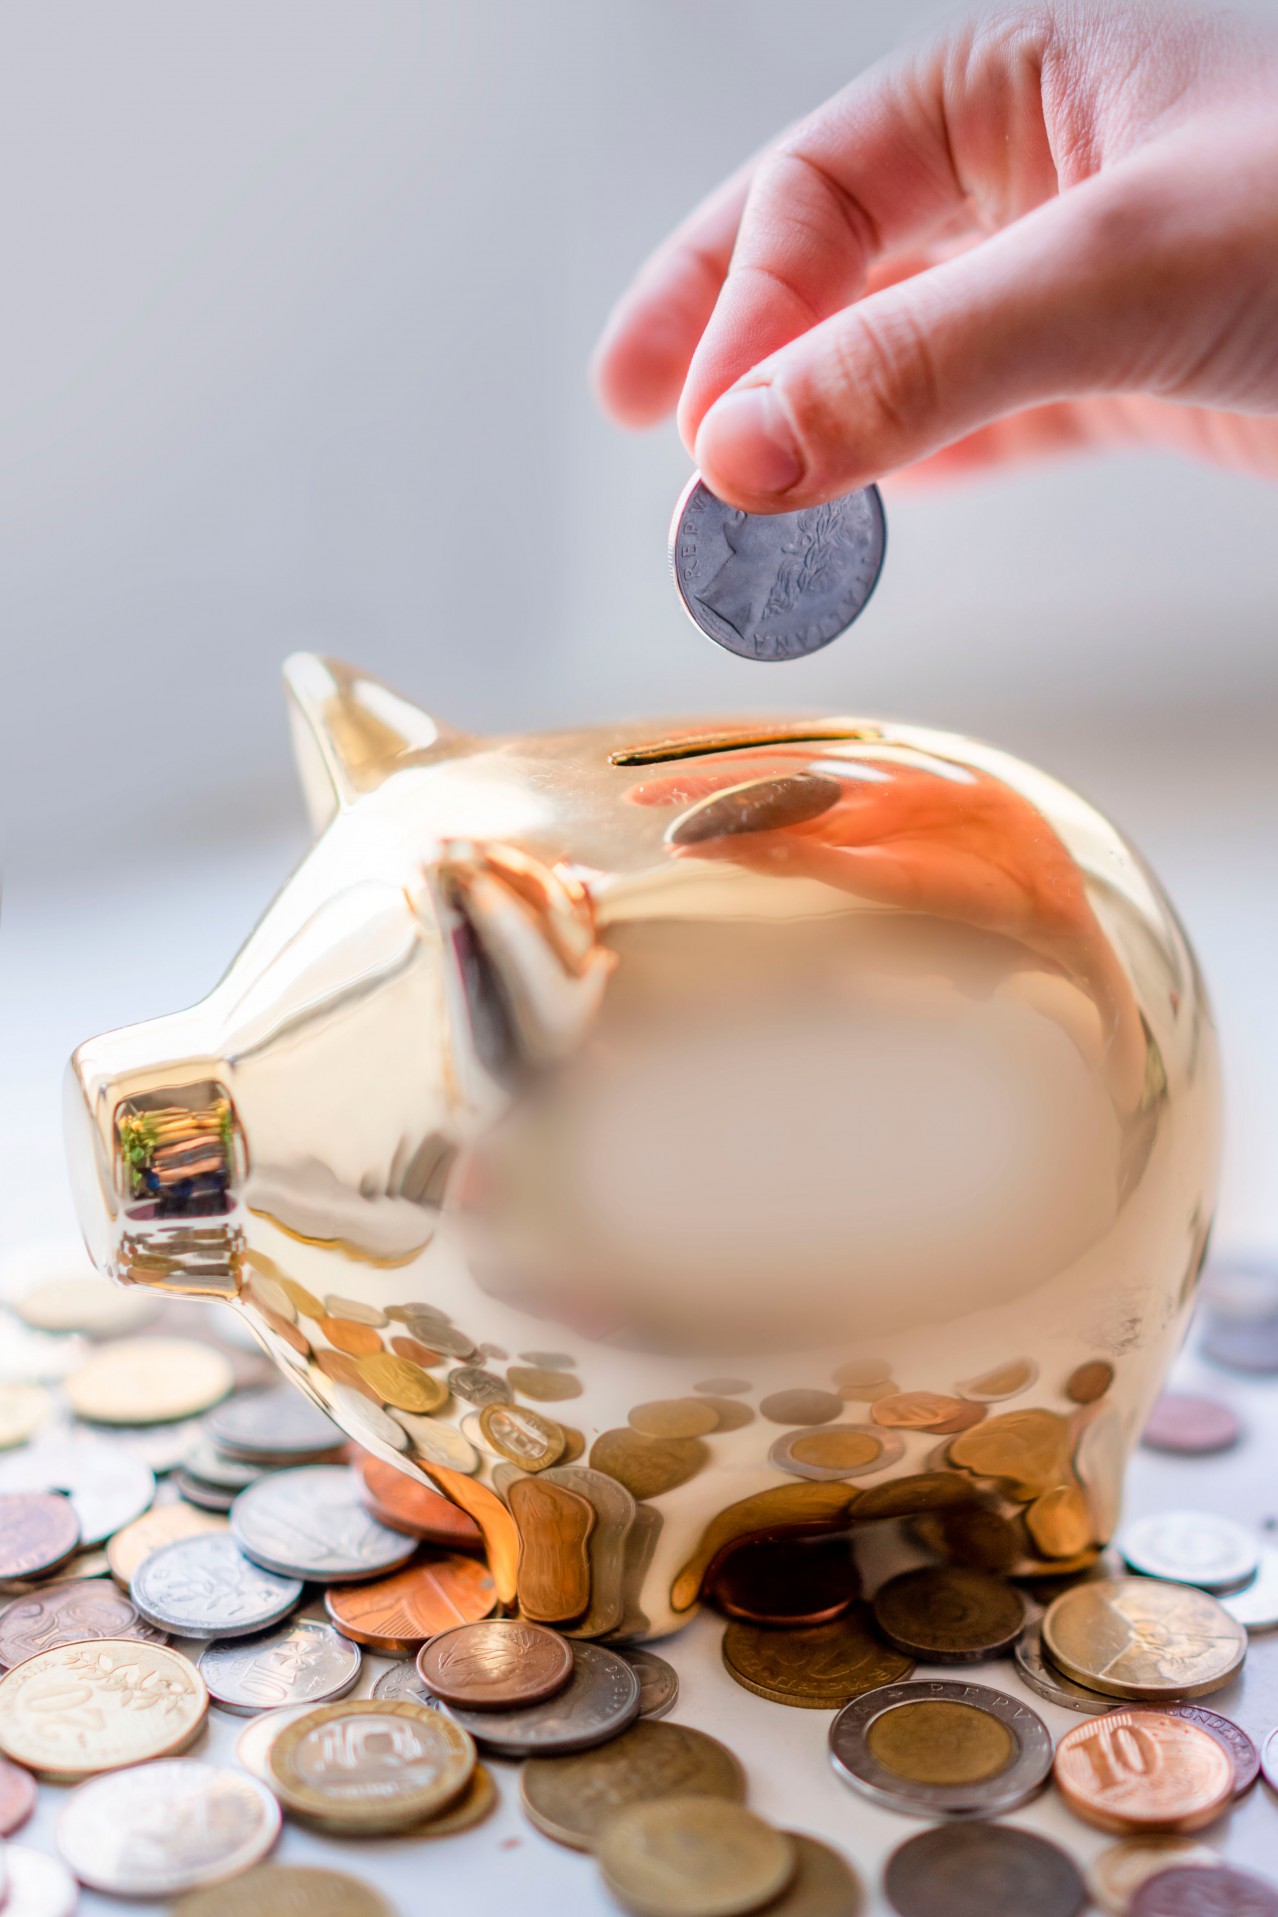 Person putting coin in the piggybank